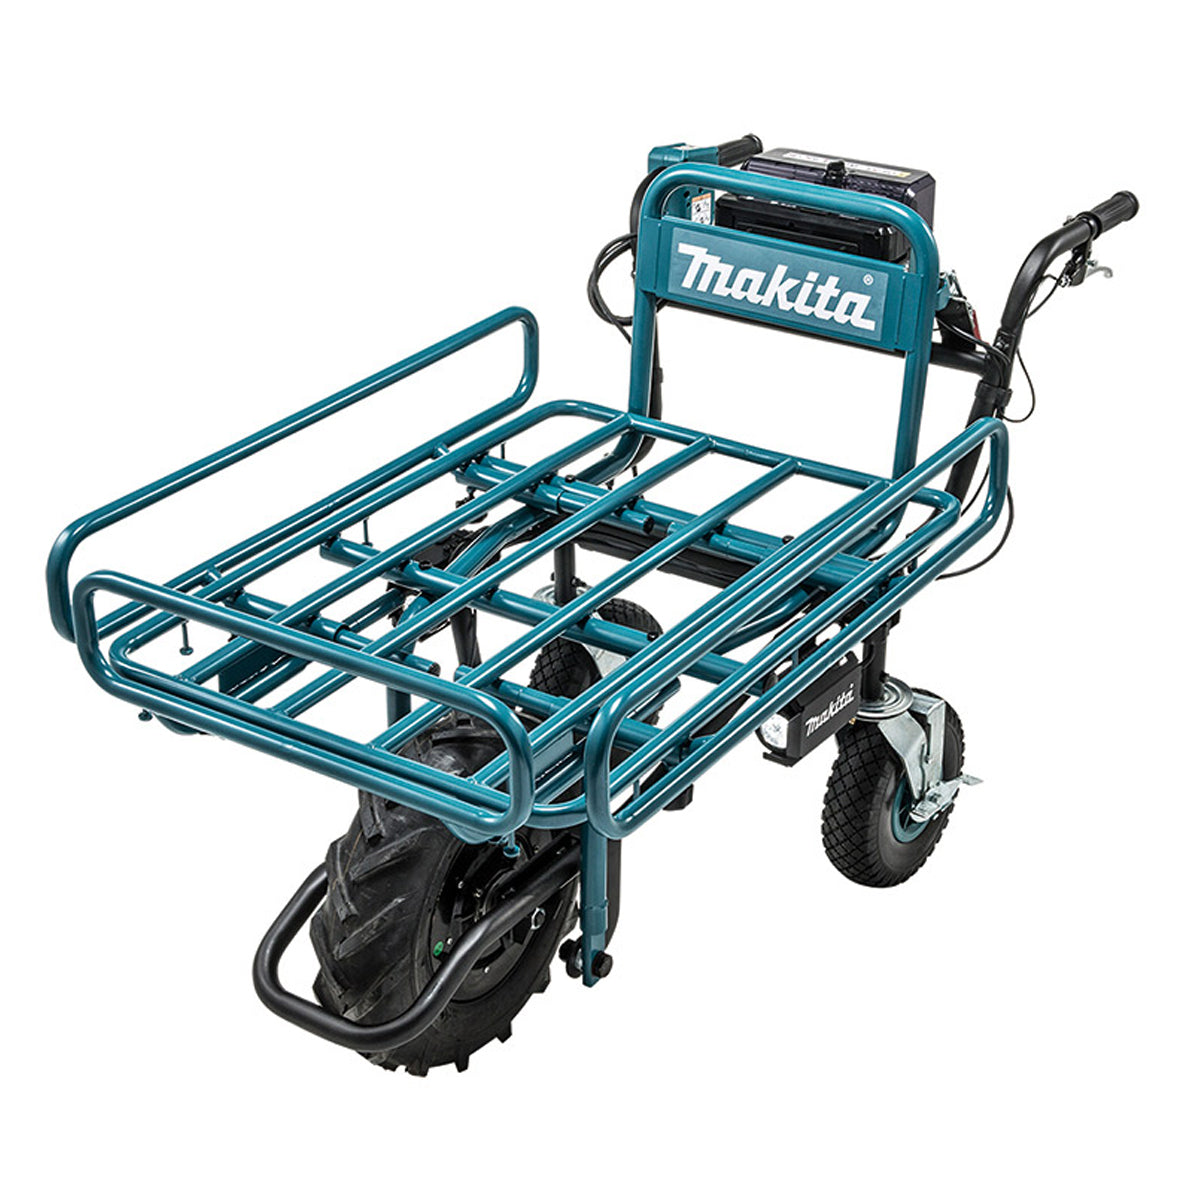 Makita DCU180PT2 18V Brushless Wheelbarrow with 2 x 5.0Ah Batteries & Charger